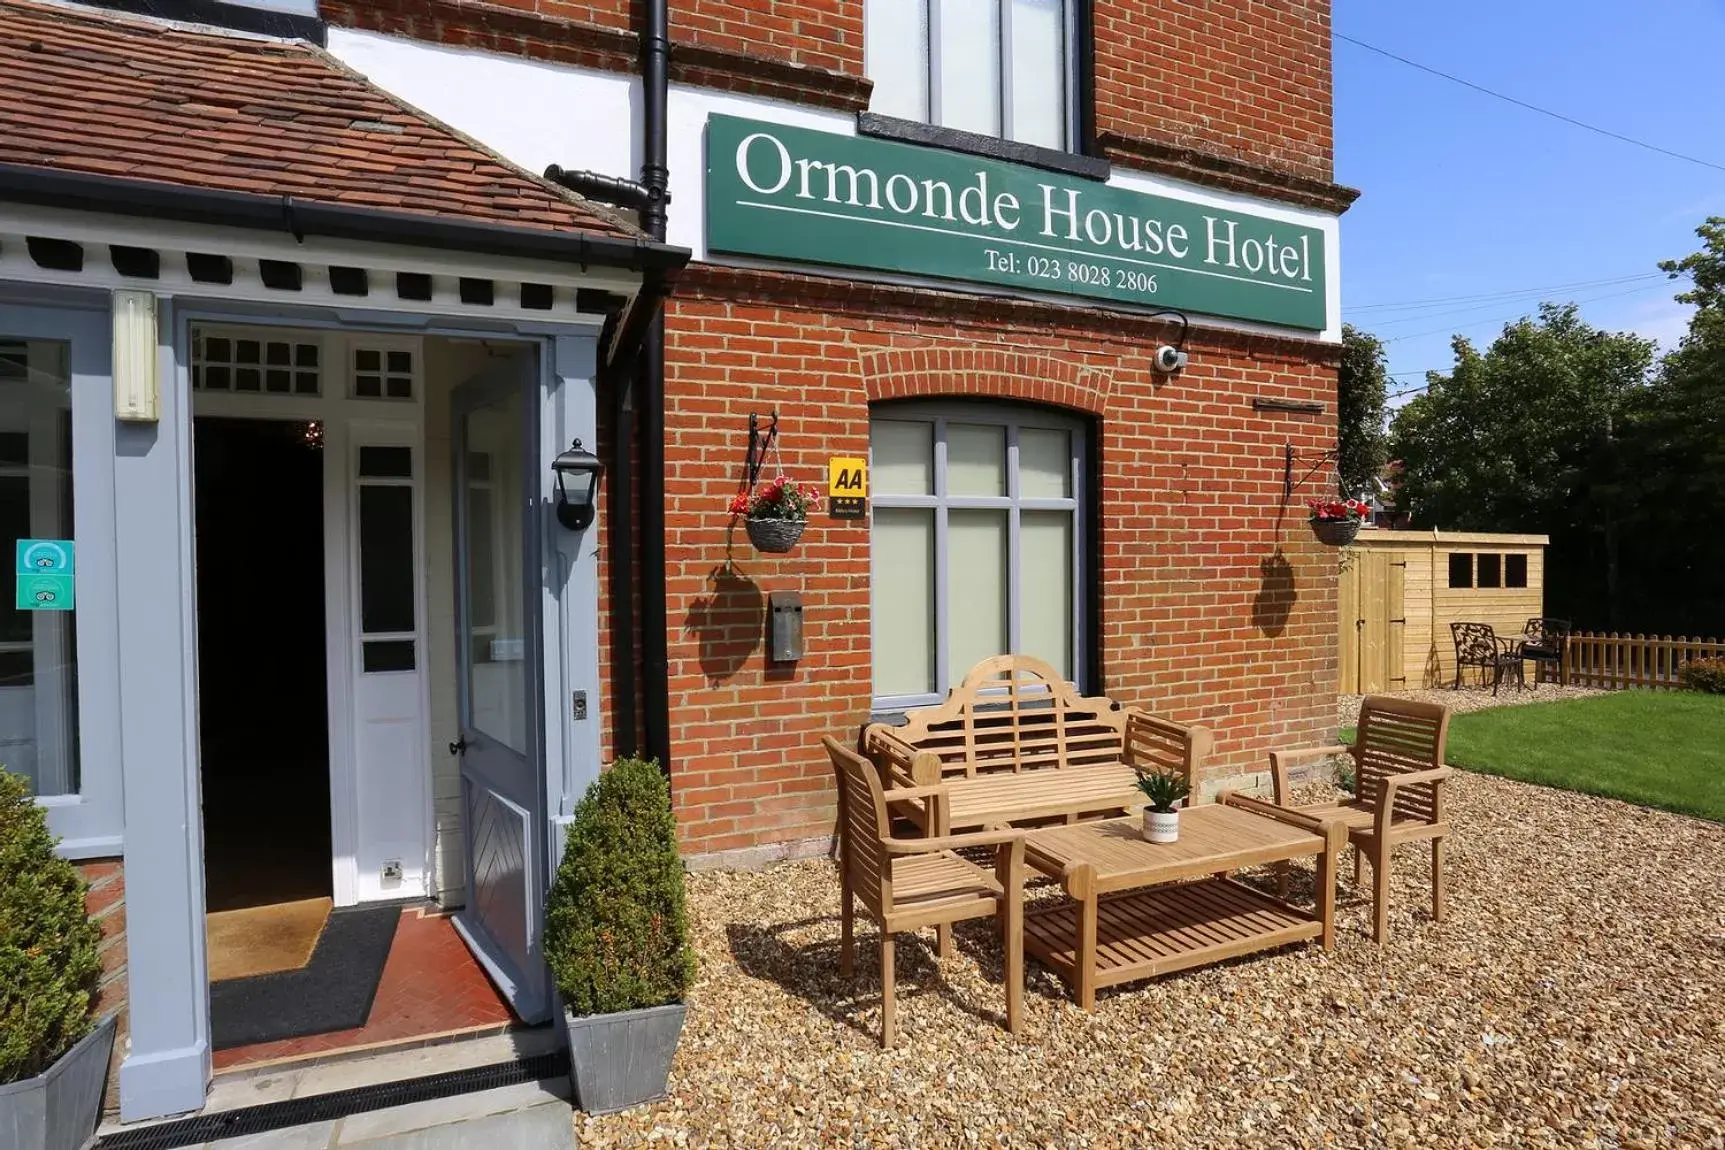 Property building in Ormonde House Hotel